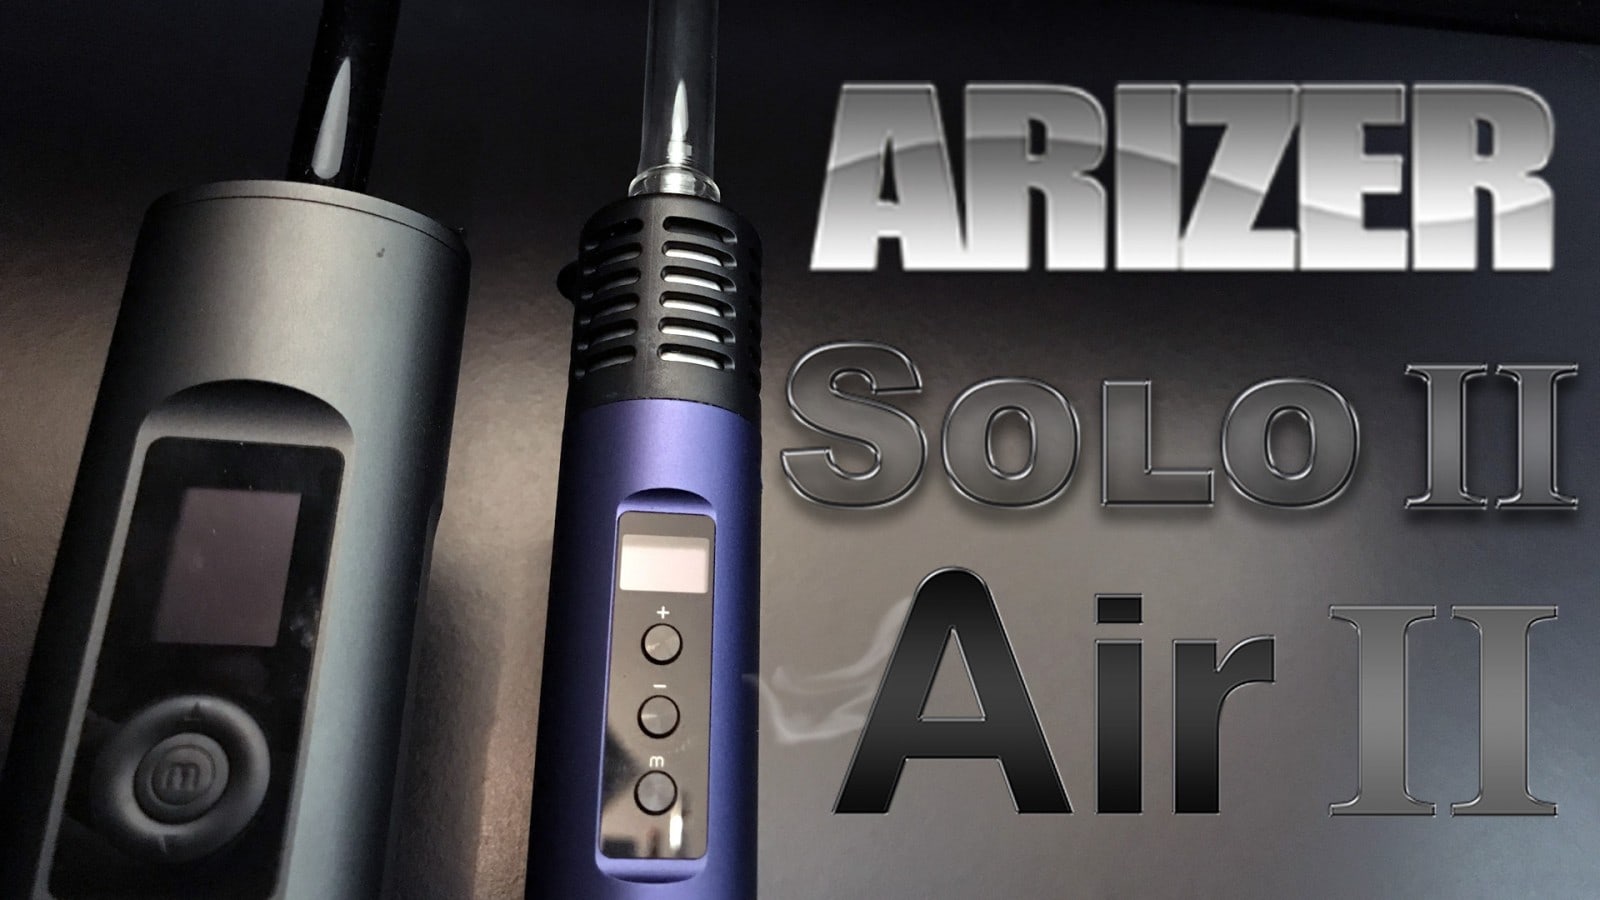 Arizer Solo 2 Review – Casual and Classy Cannabis Vaporizer for Dry Herb